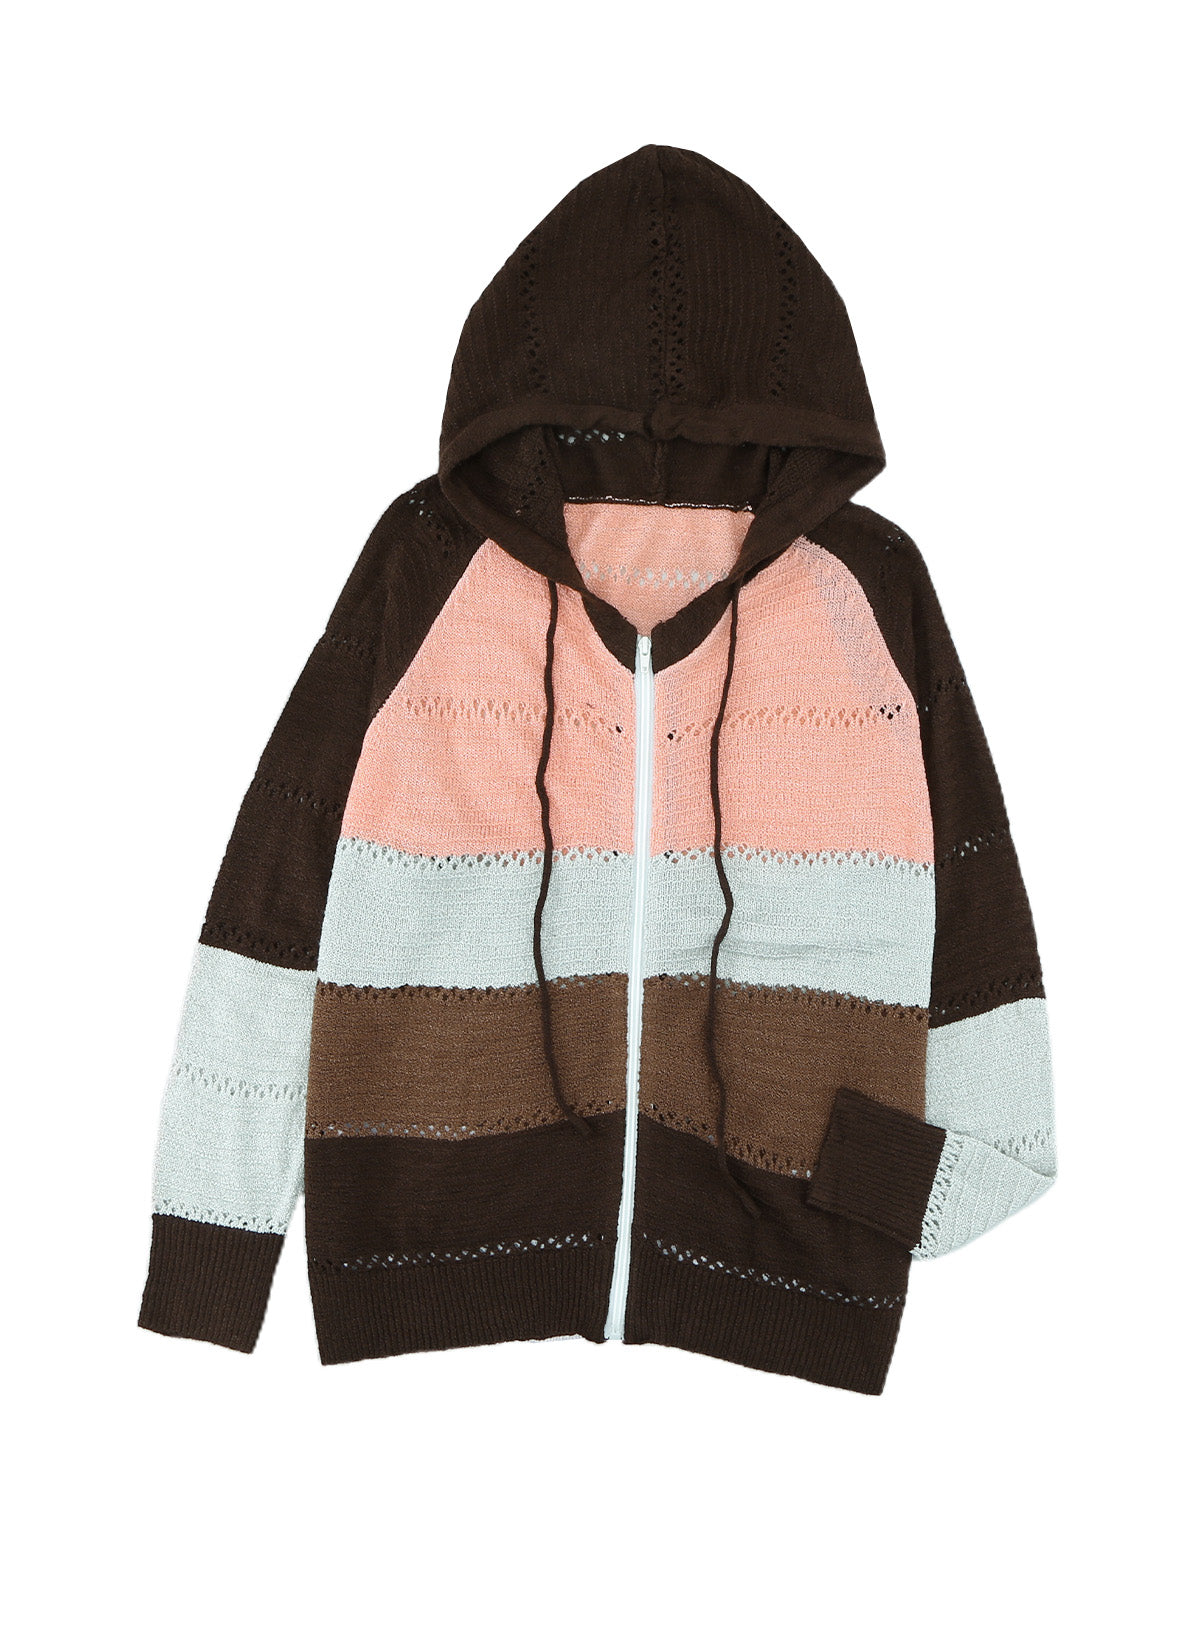 Brown Zipped Front Colorblock Hollow-out Knit Hoodie Sweatshirts & Hoodies JT's Designer Fashion